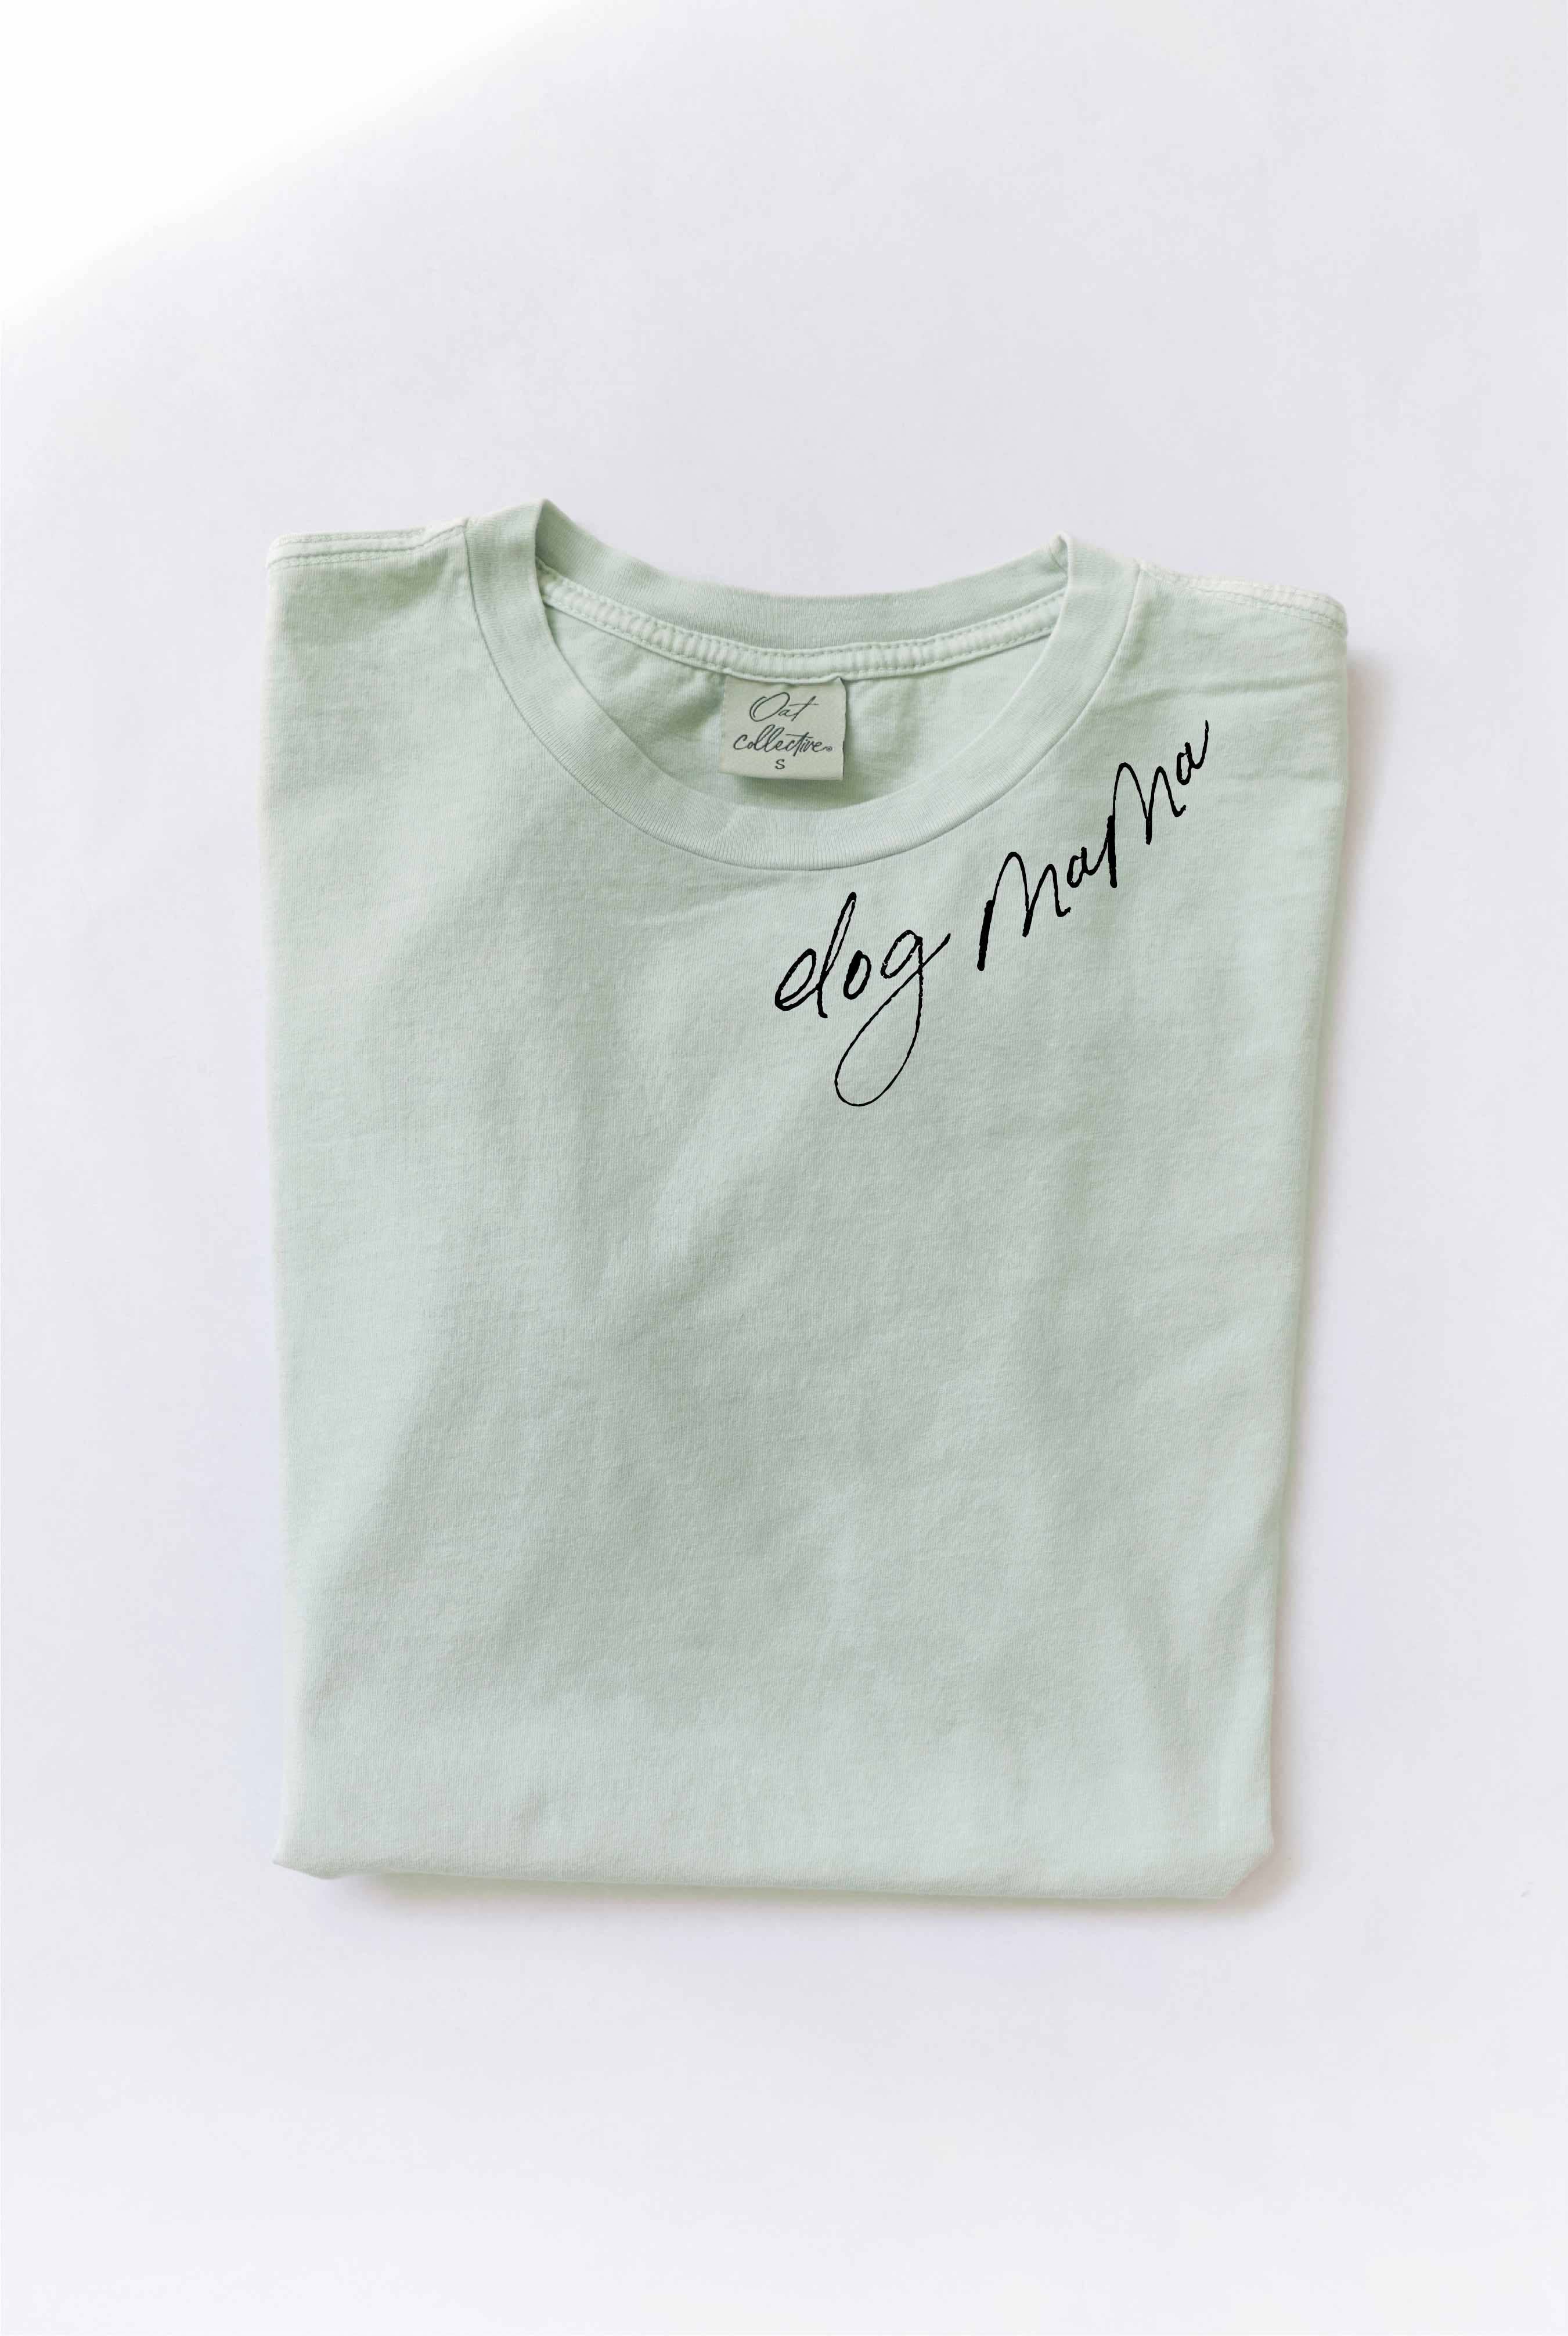 OAT COLLECTIVE - DOG MAMA Mineral Washed Graphic Top: CREAM / XL